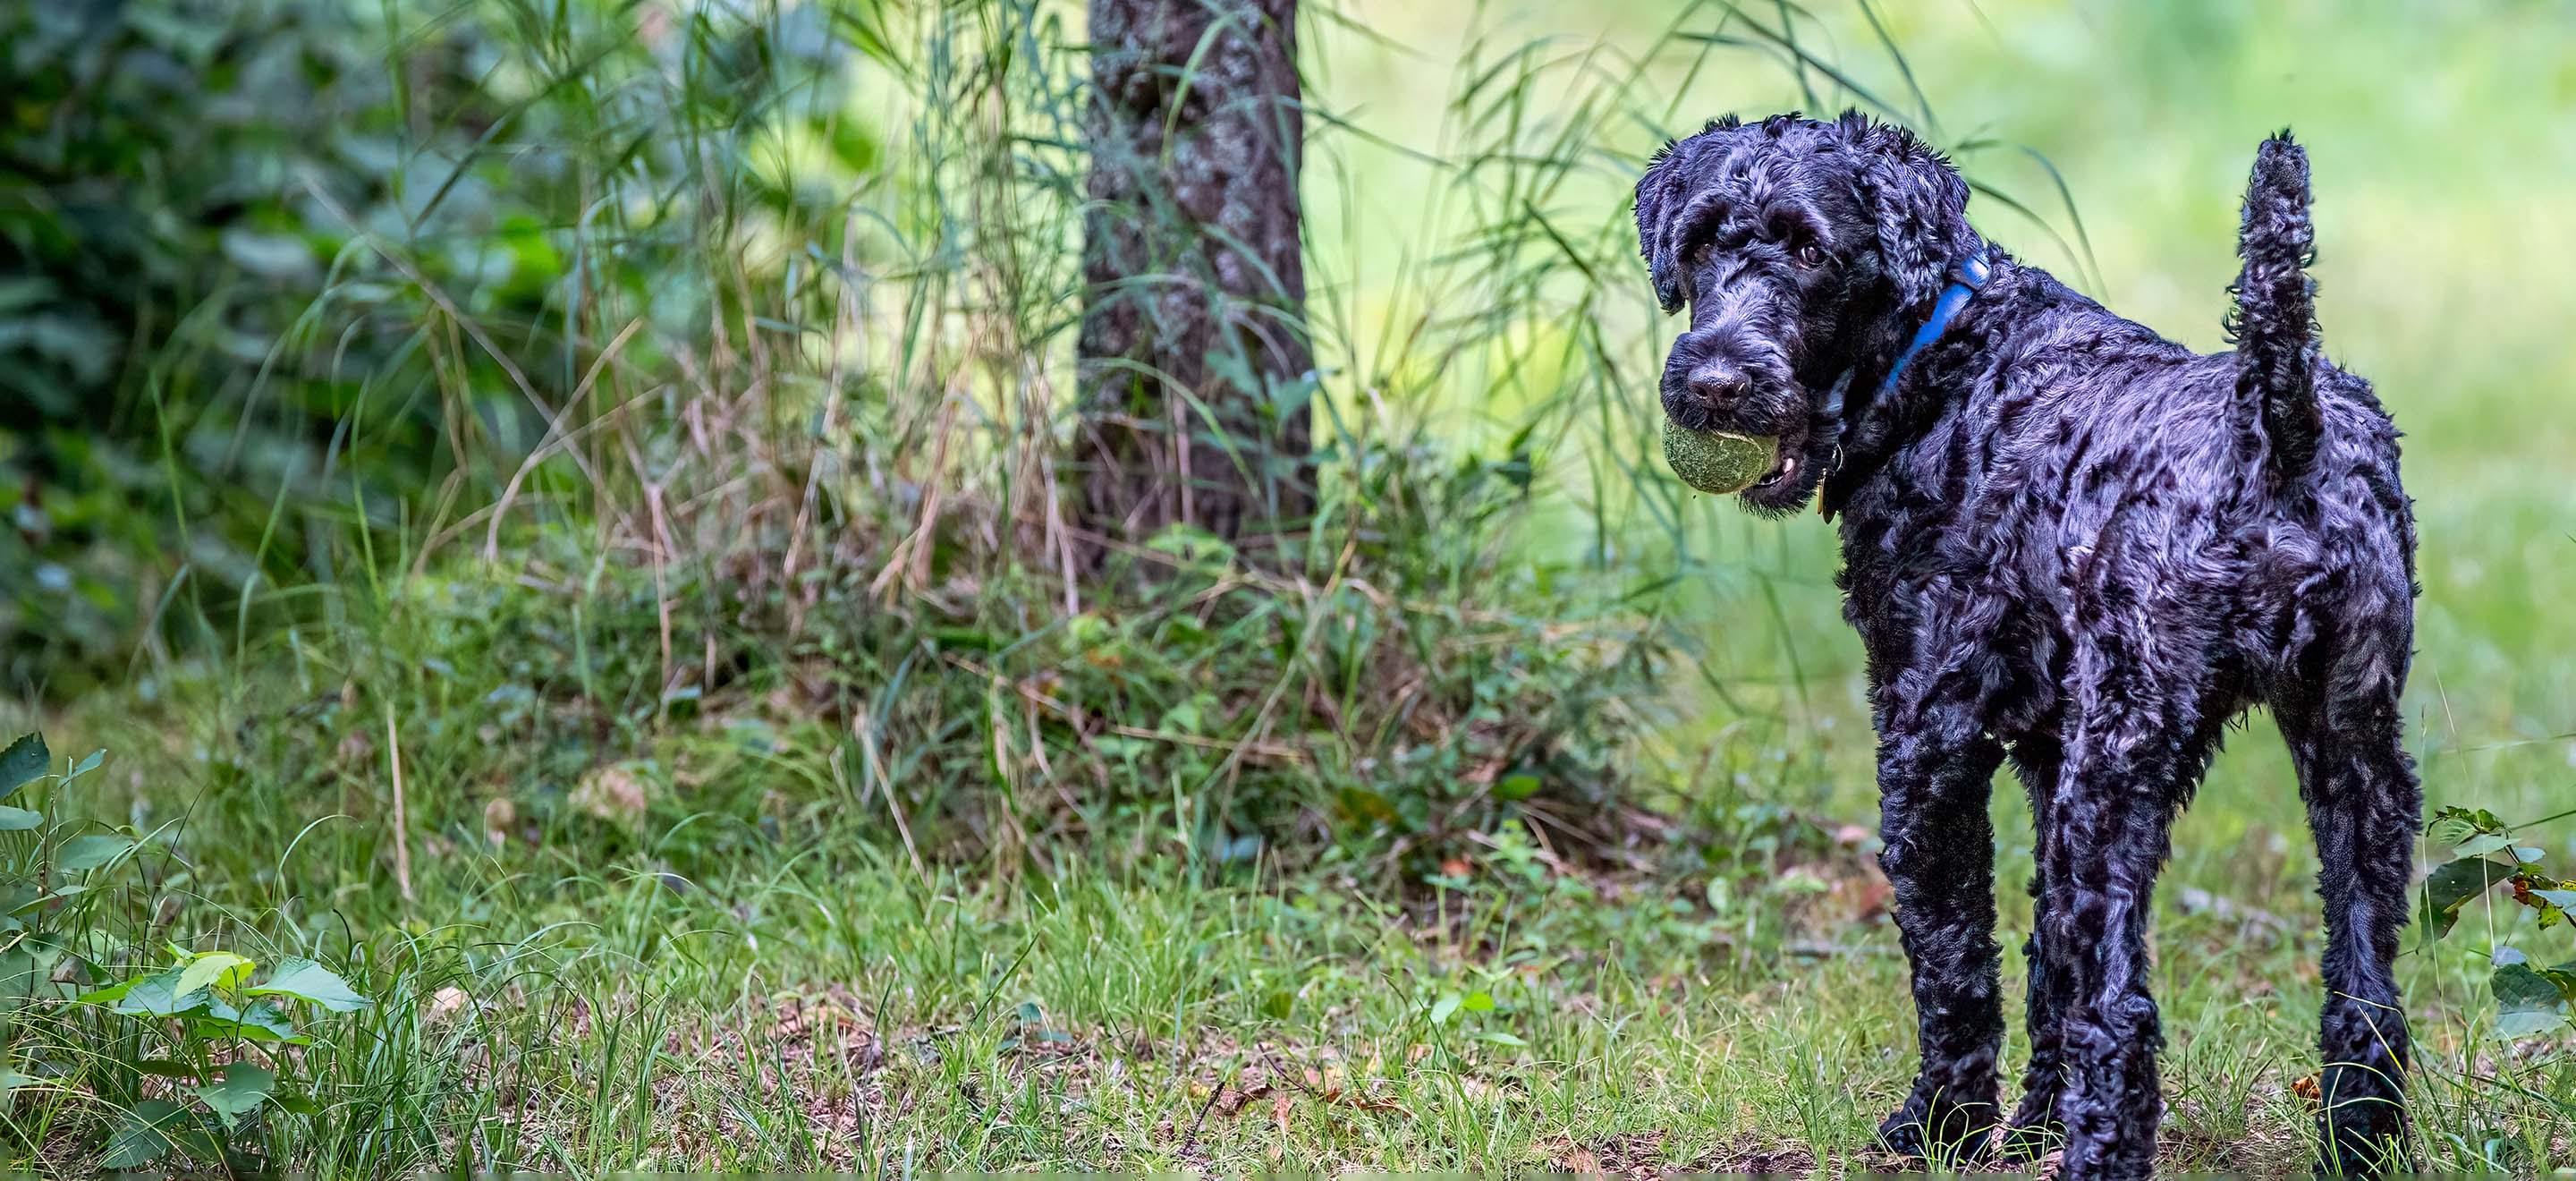 A Kerry Blue Terrier dog with a tennis ball in its mouth turning back to look at the camera while standing in the woods image